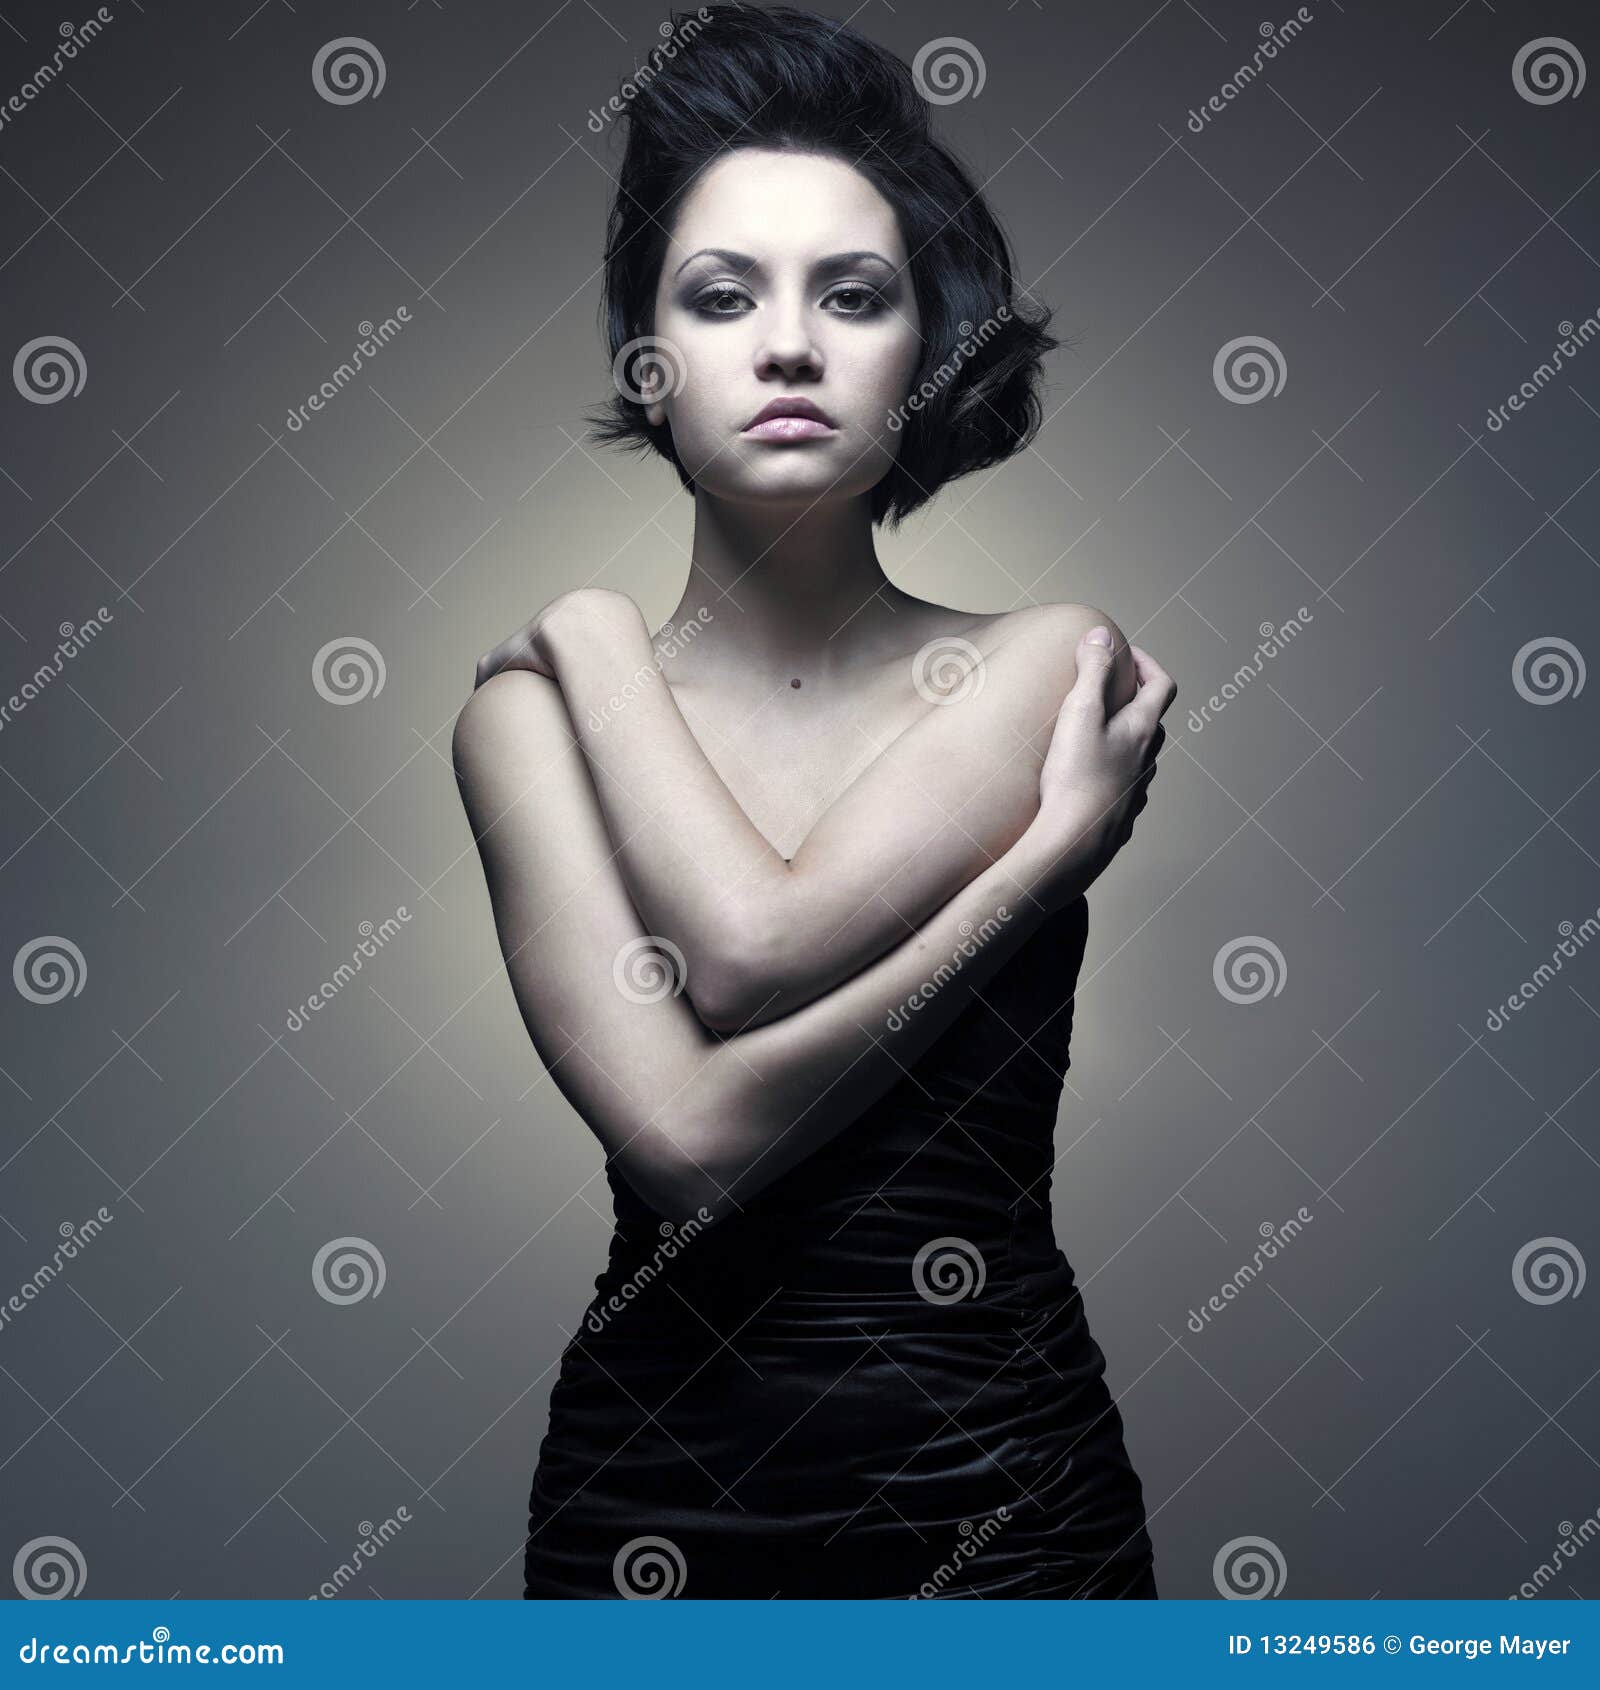 Young magnificent lady stock photo. Image of brunette - 13249586